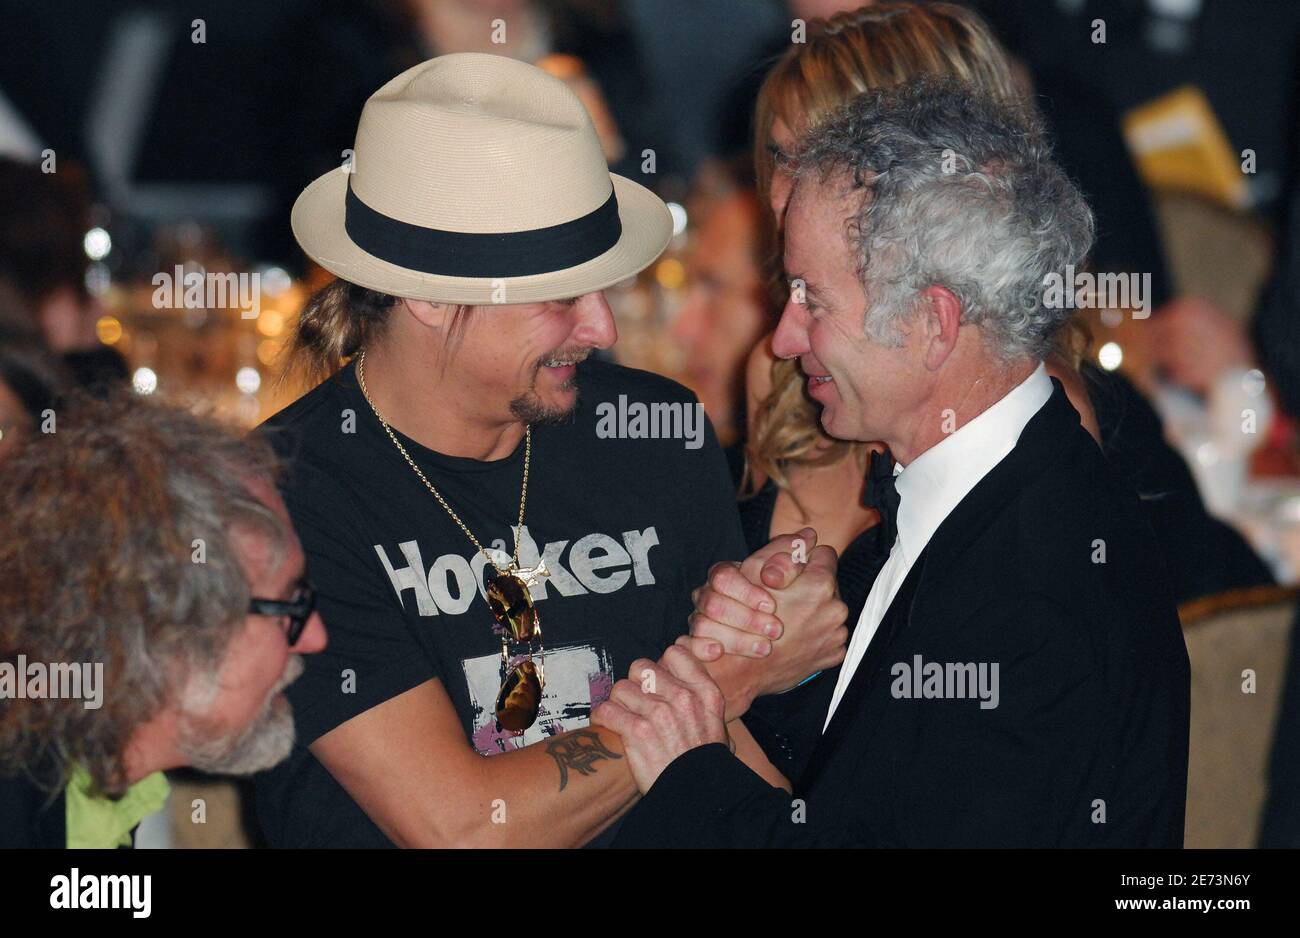 Musician Kid Rock and US tennis player John McEnroe attend the 22nd annual Rock And Roll Hall of Fame Induction Ceremony held at the Waldorf Astoria Hotel in New York City, NY, USA on March 12, 2007. Photo by Gregorio Binuya/ABACAPRESS.COM Stock Photo